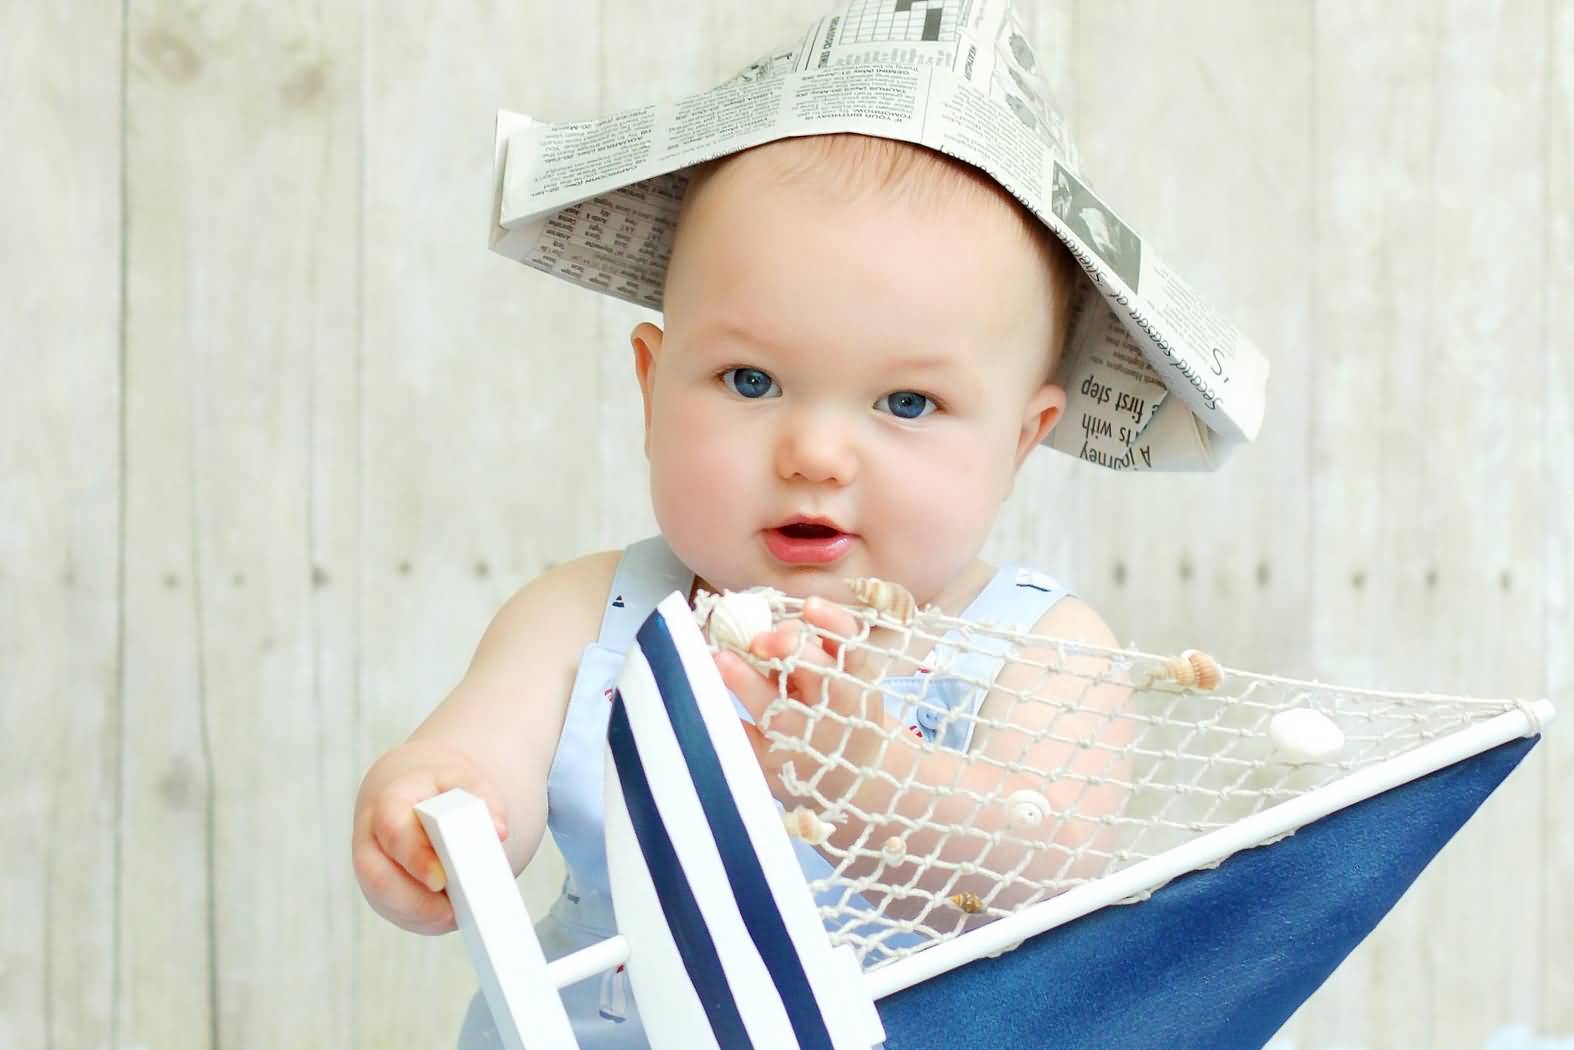 Sailor Baby Wearing Newspaper Cap Funny Picture